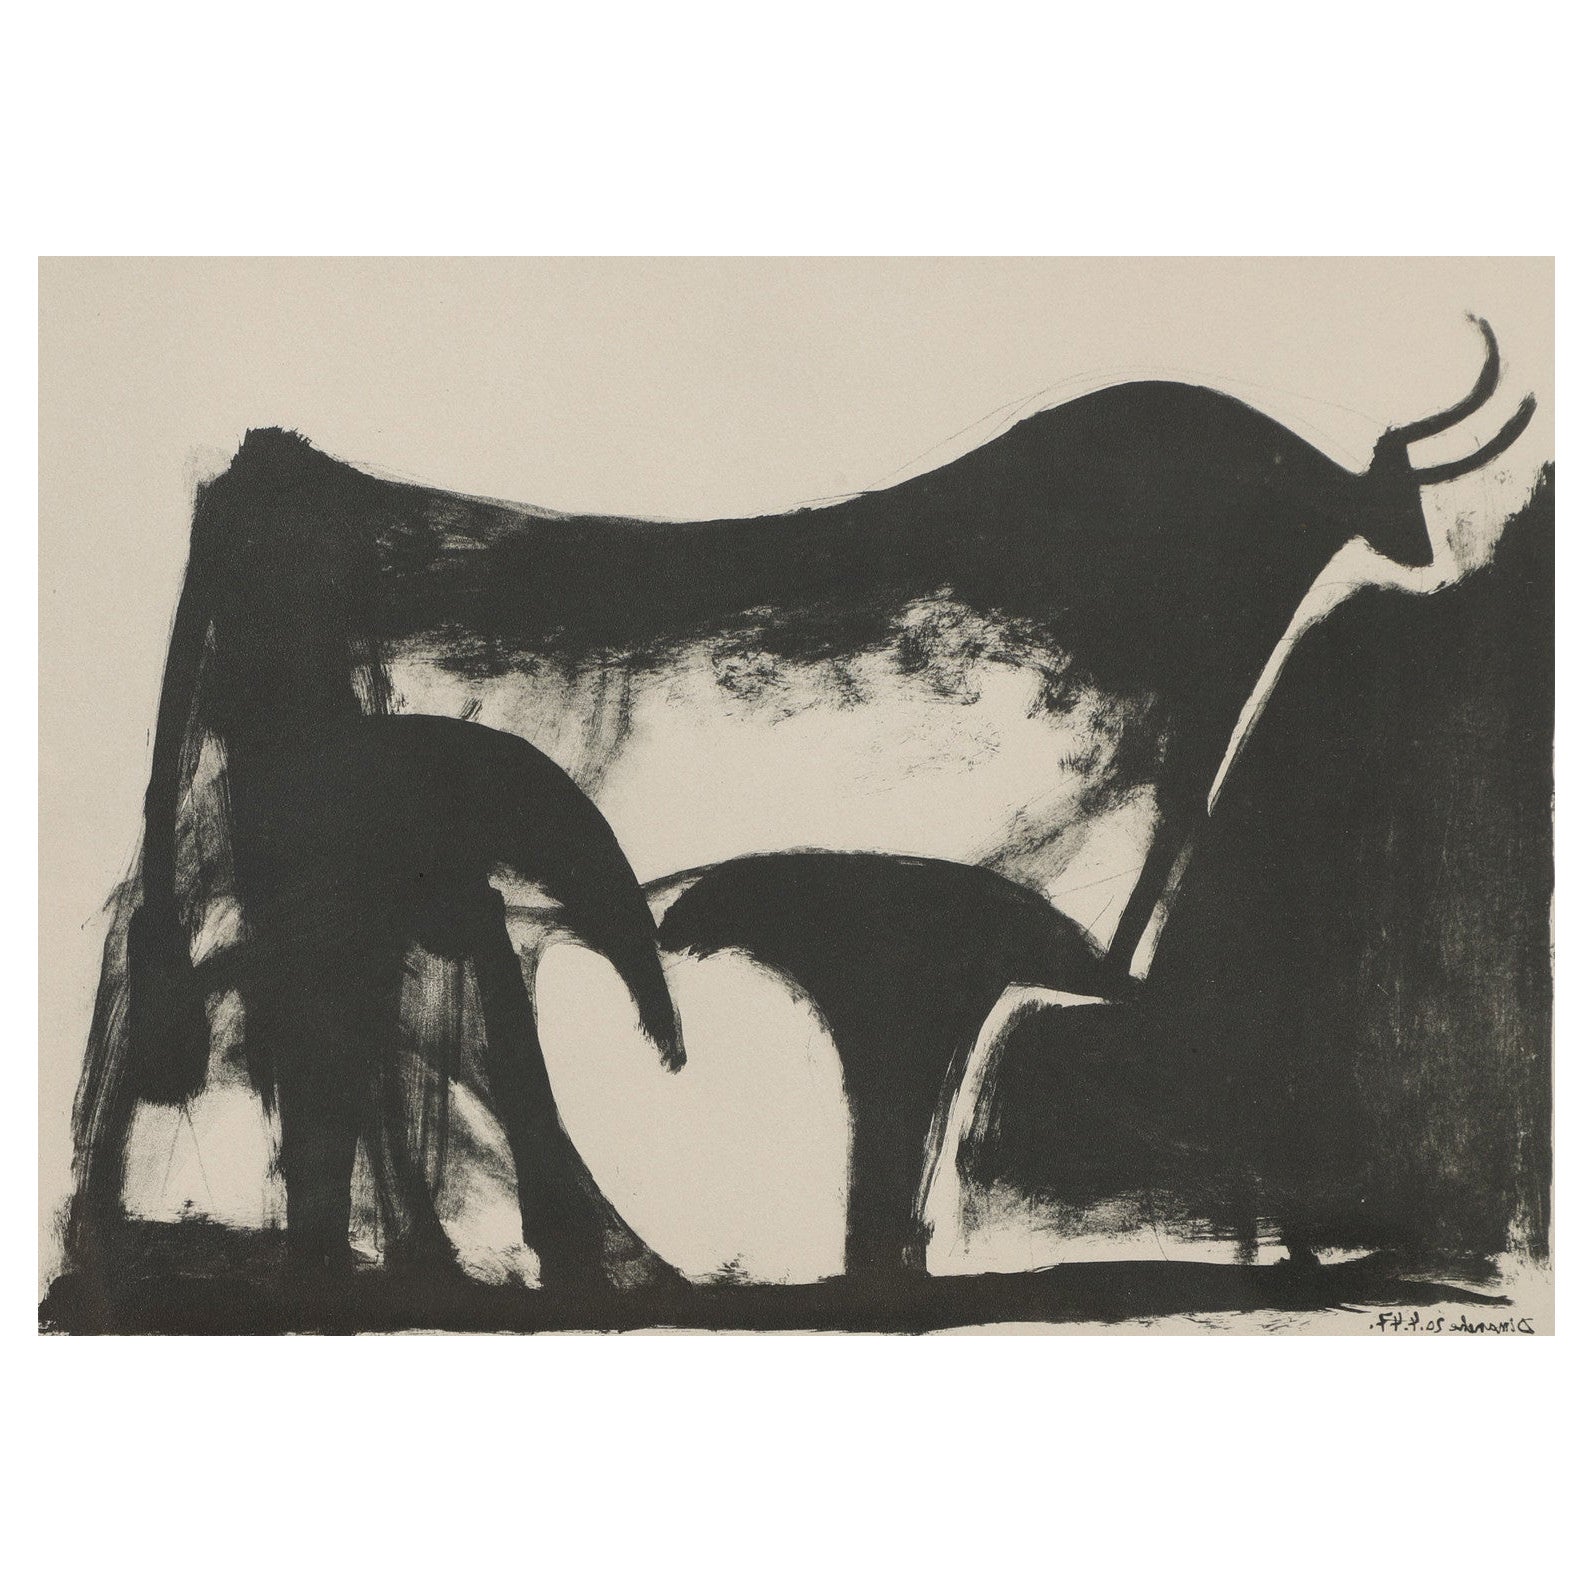 Nach Pablo Picasso "The Black Bull Lithographie im Angebot